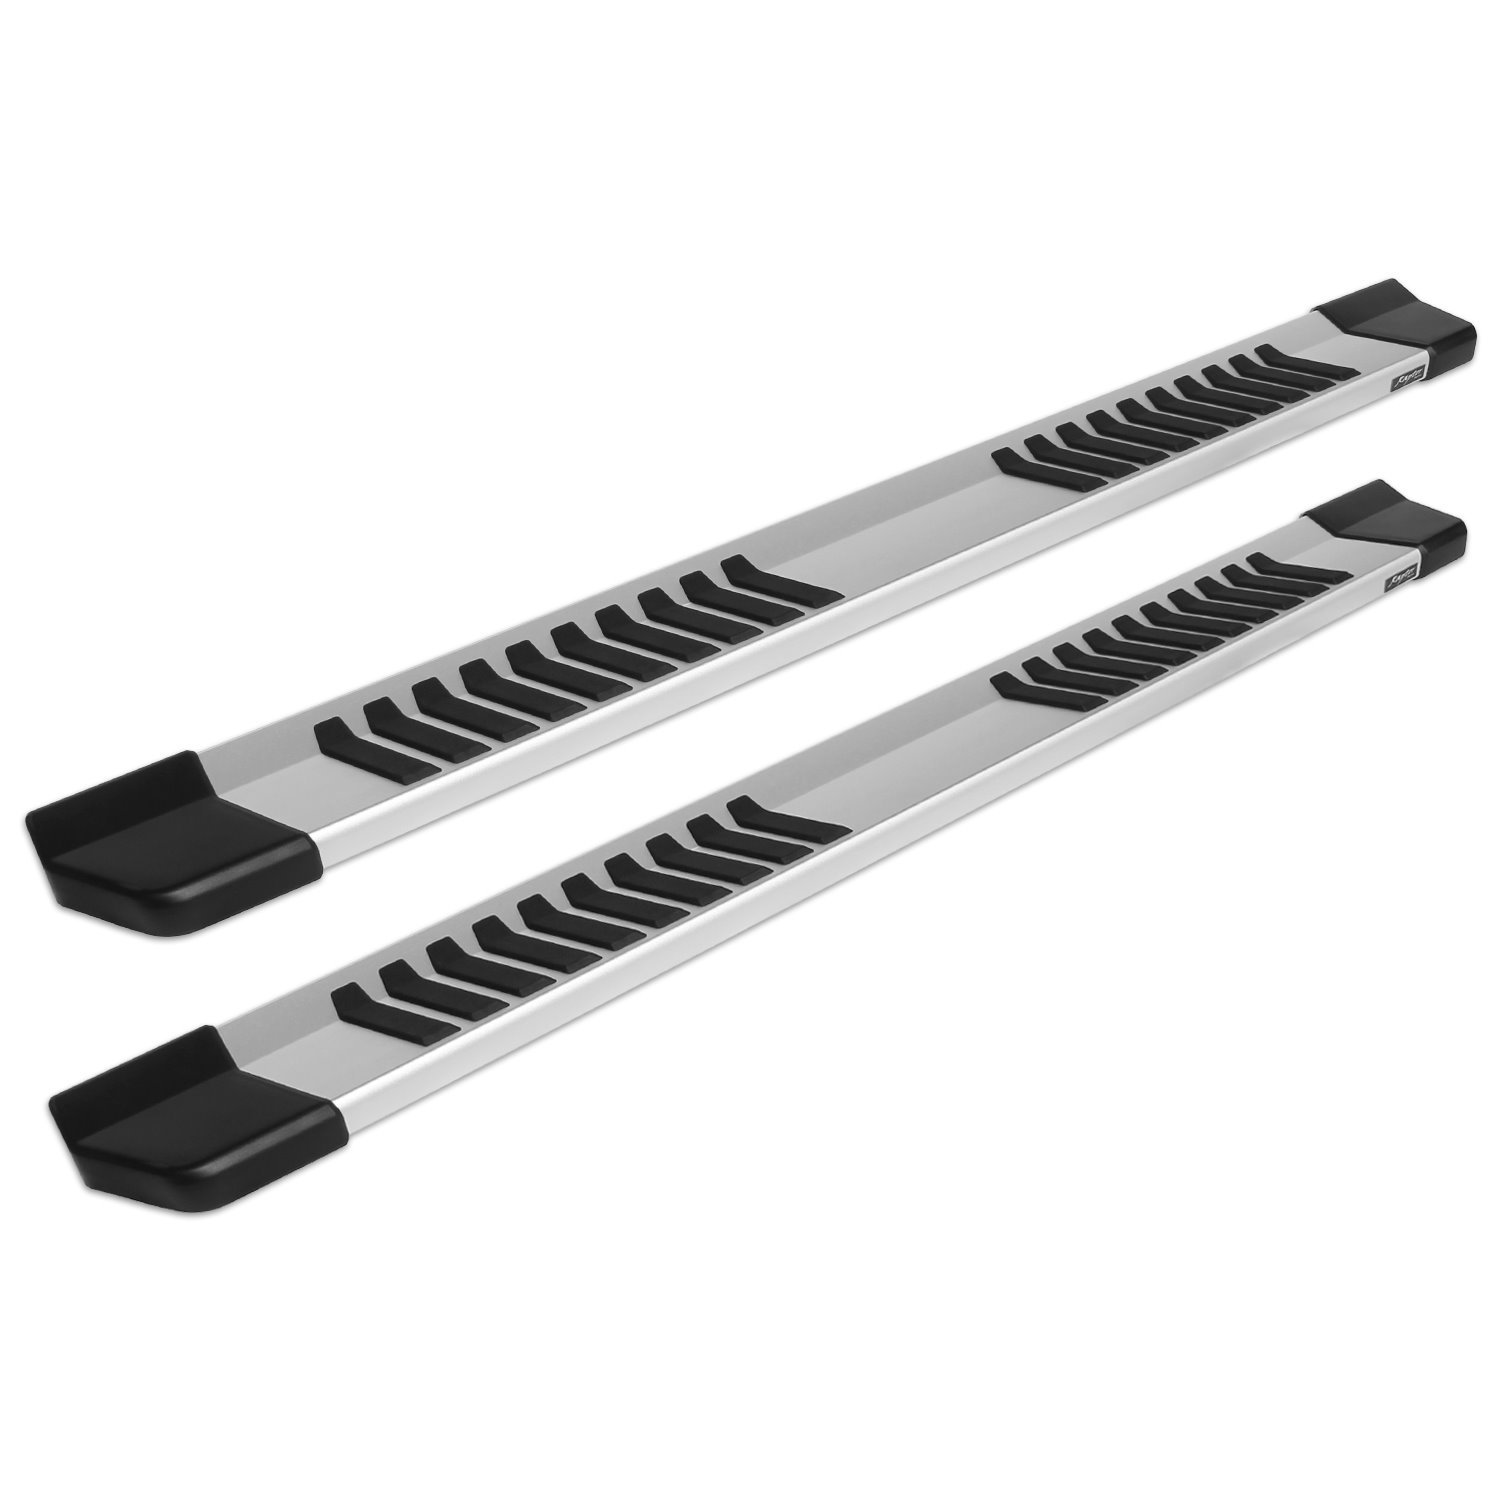 1704-0133 Raptor Series 6 in OEM Style Slide Track Running Boards, Brushed Aluminum, Fits Select Toyota Tundra Double Cab